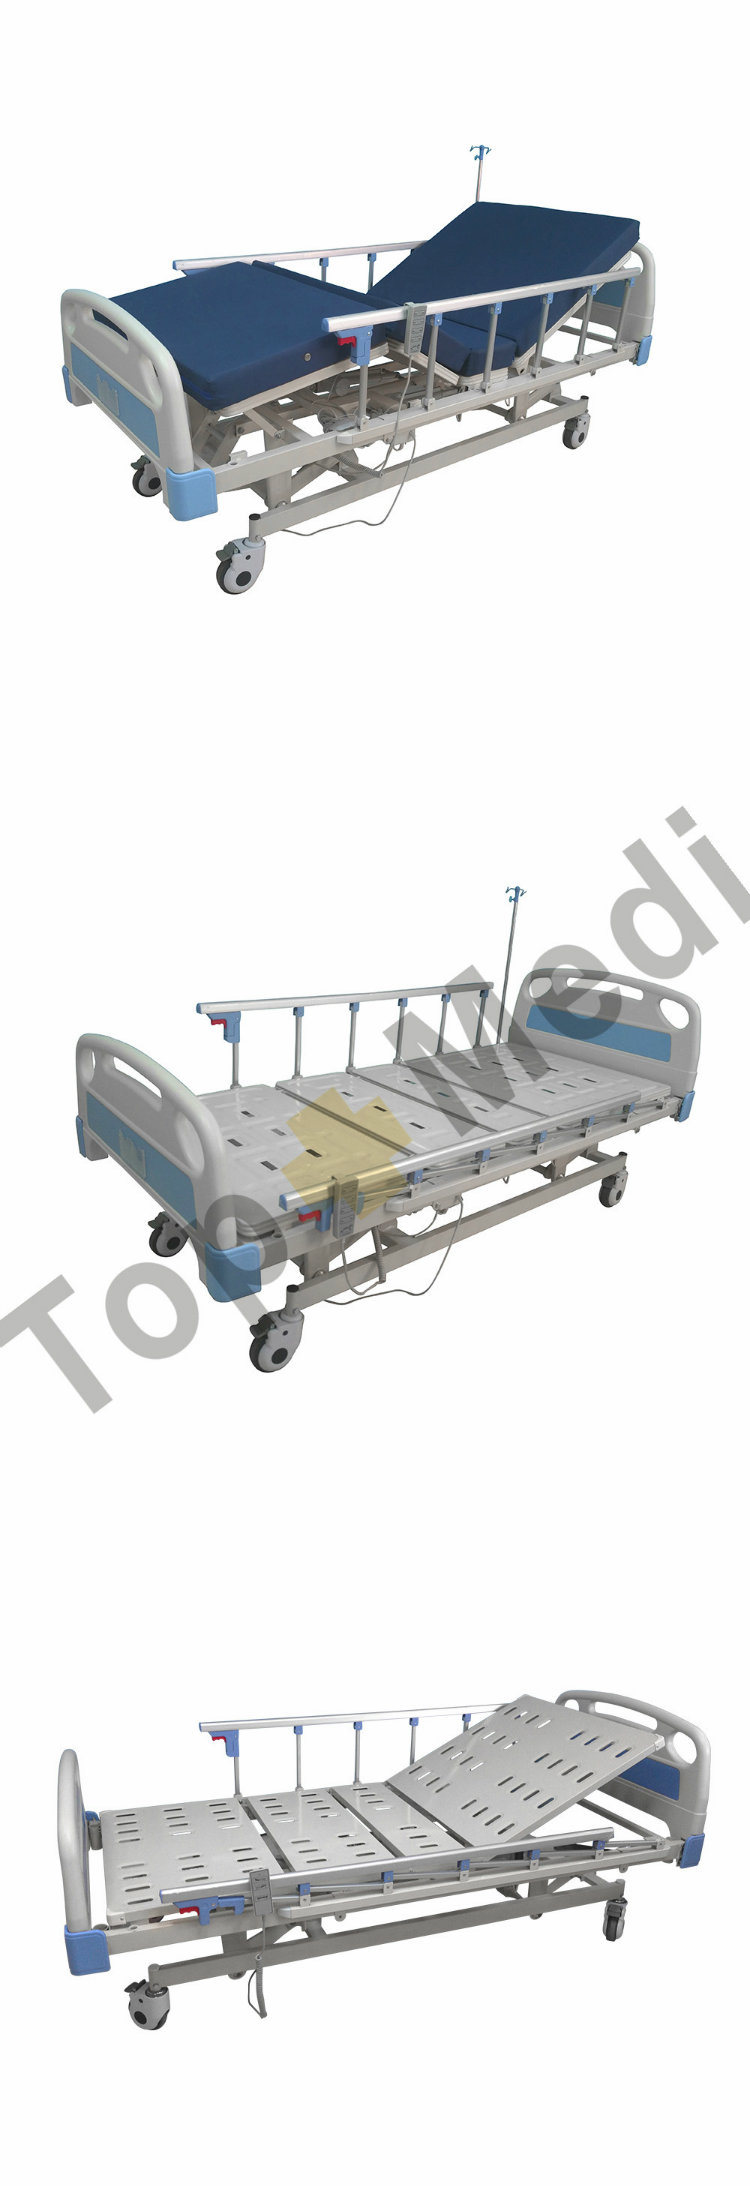 Medical Home Care Equipment Adjustable 3 Function Electric Power Hospital Bed Prices